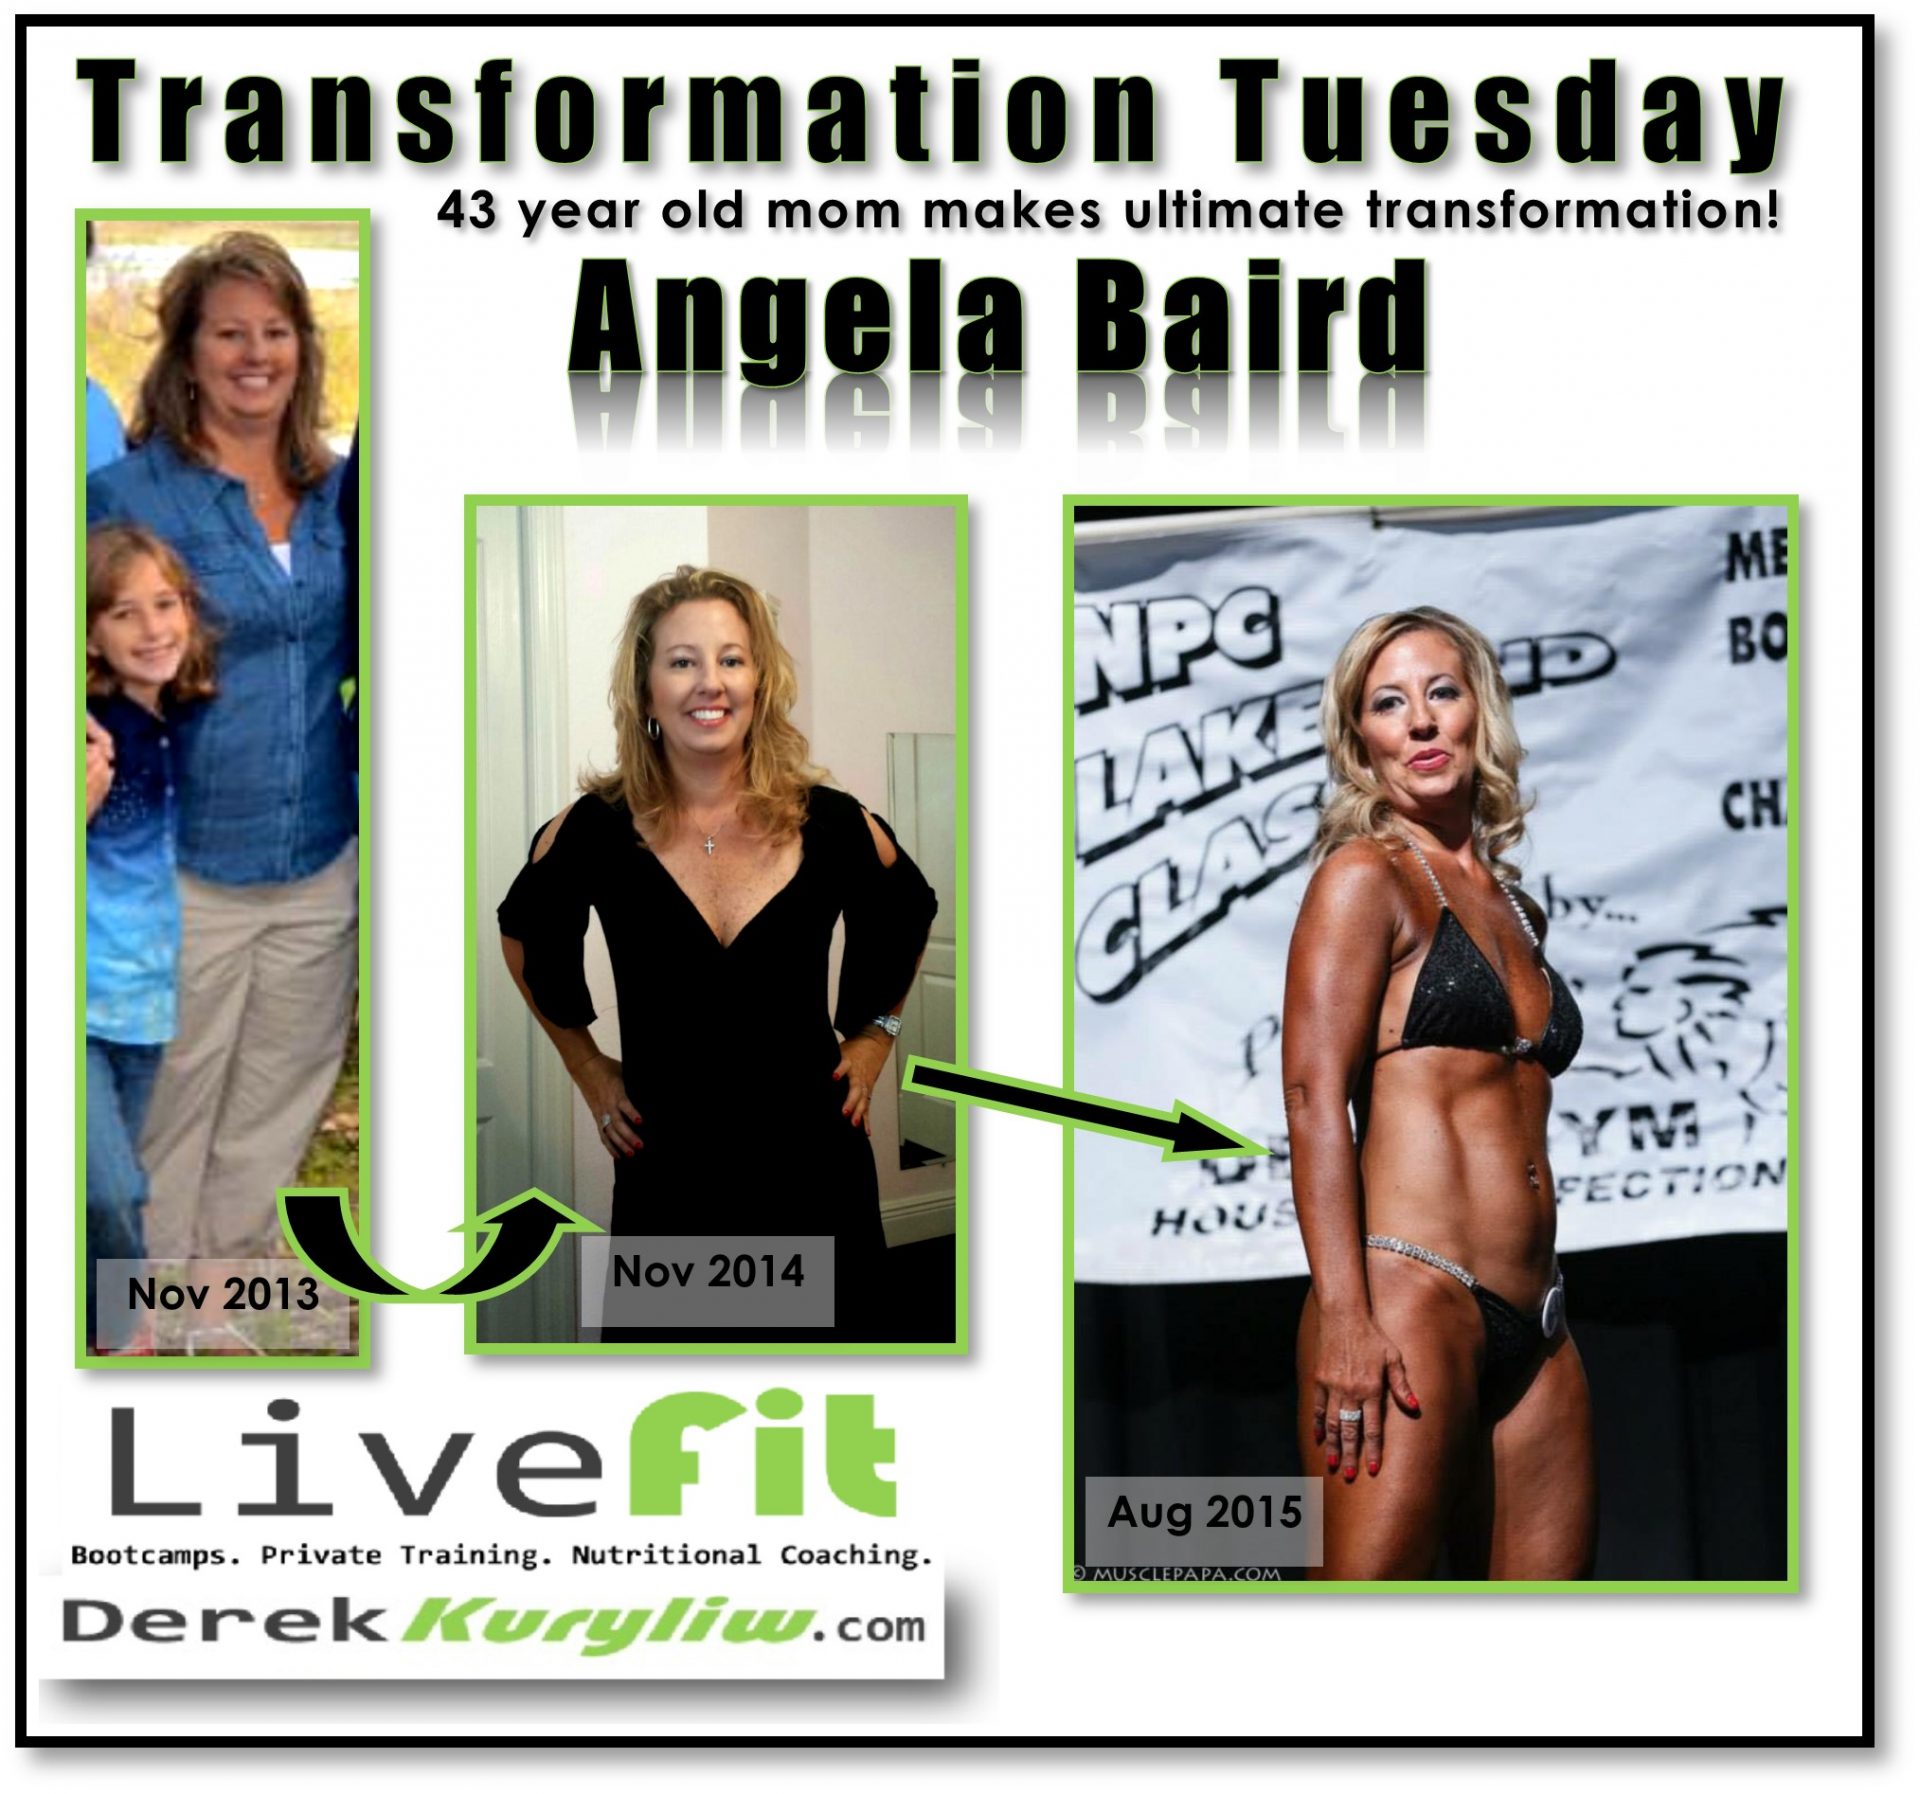 The Best Me at 43! (Angela’s story of strength, confidence & commitment)